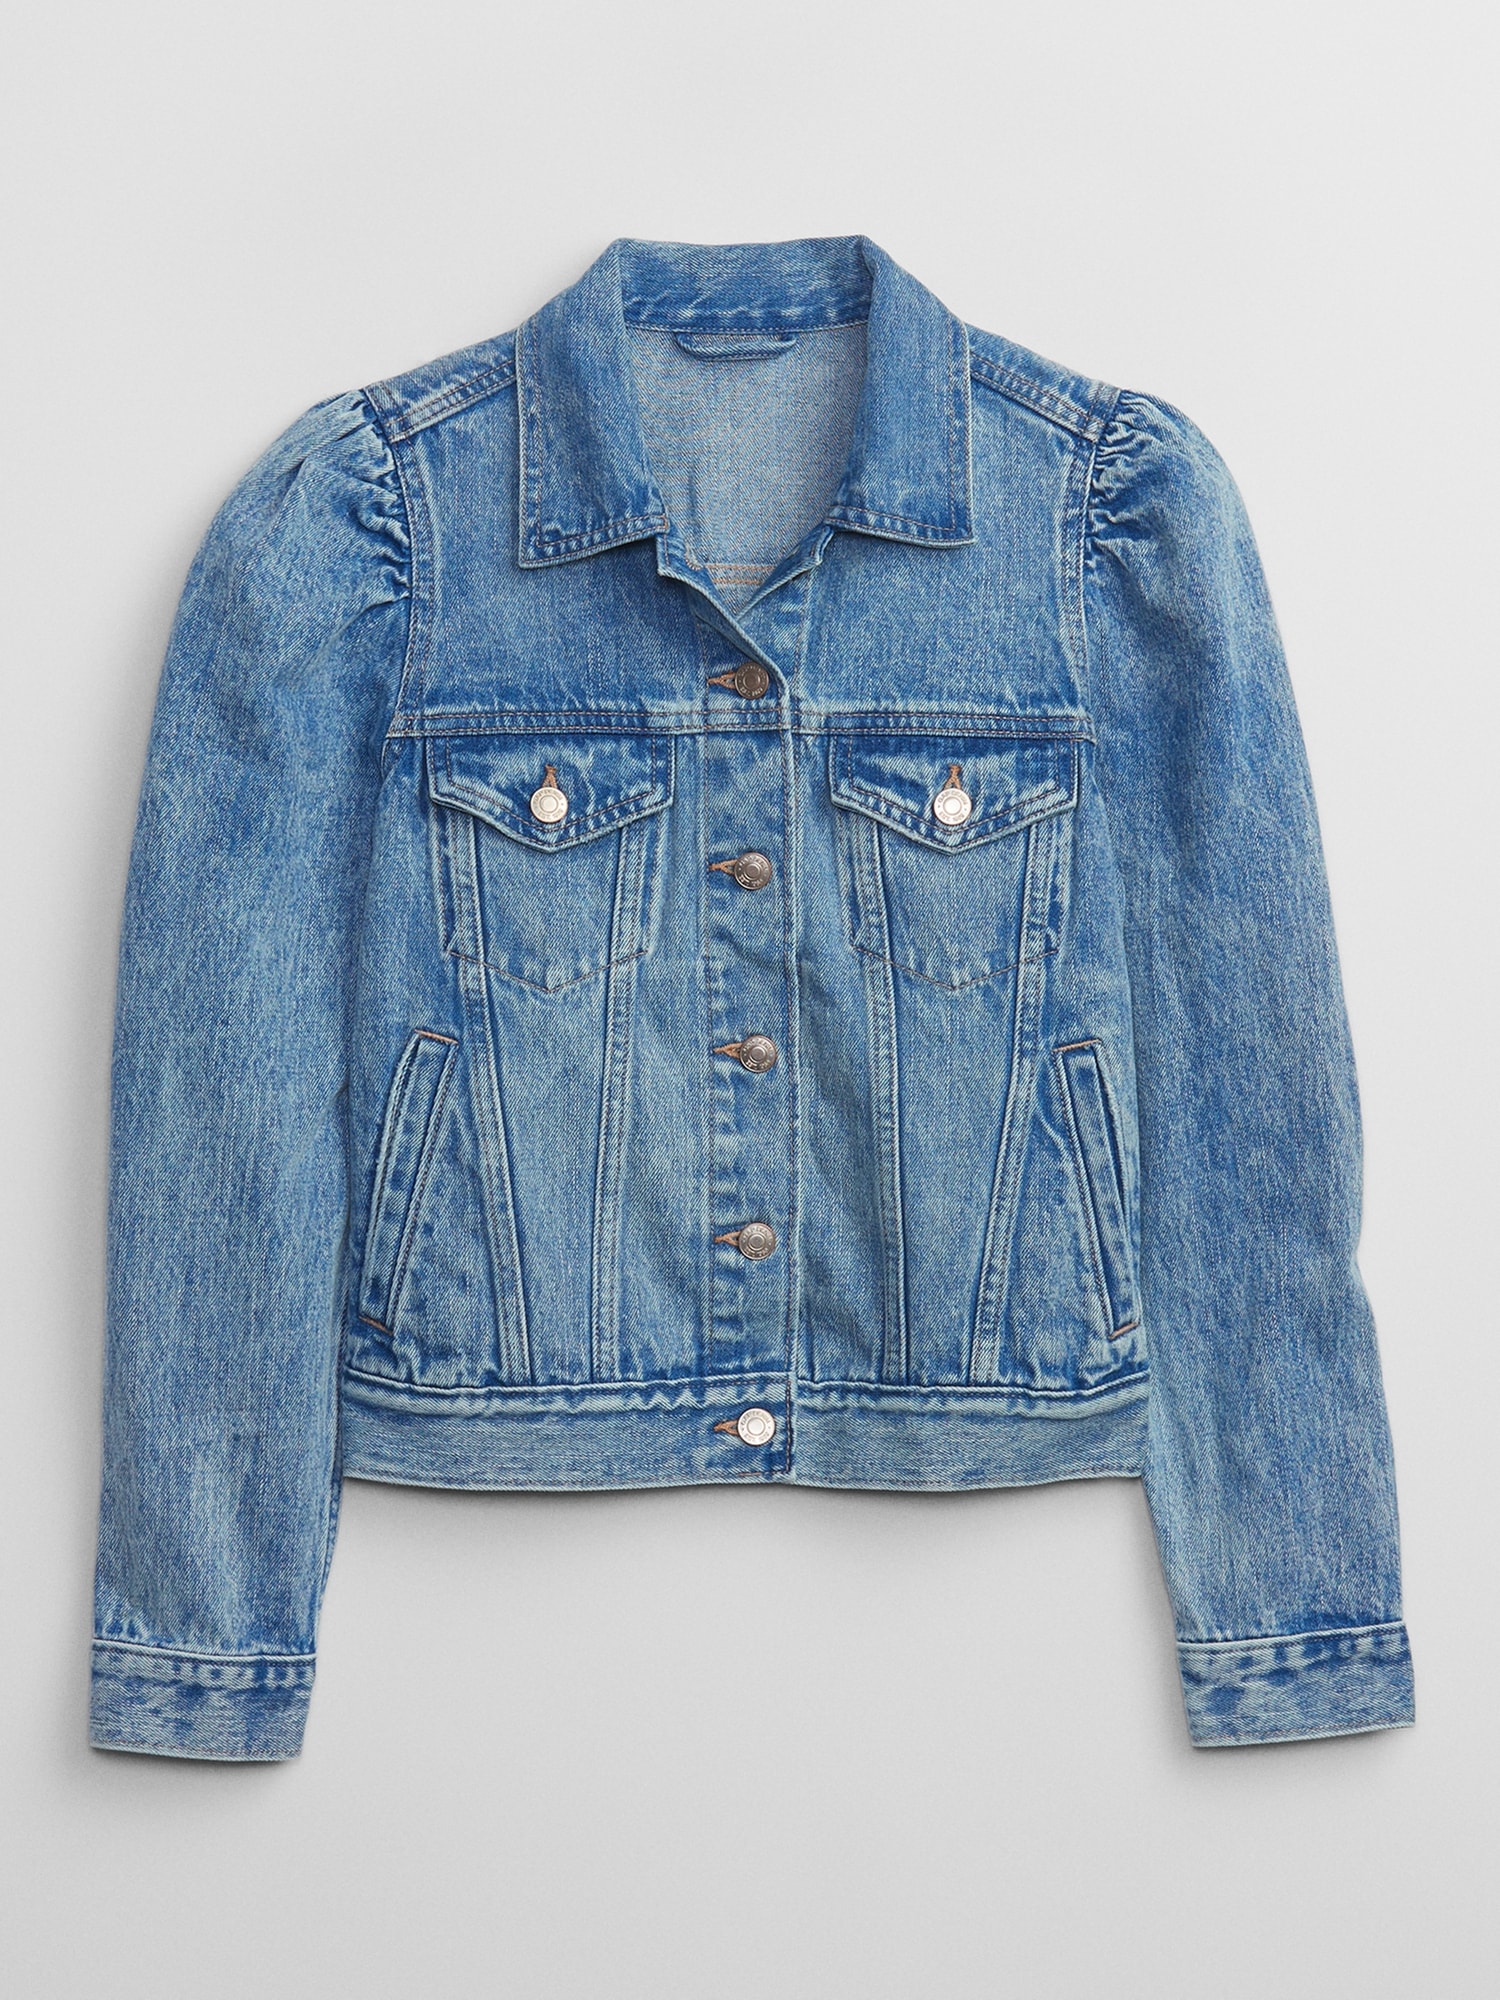 How To Find The Perfect Denim Jacket | Everything You Need To Know!